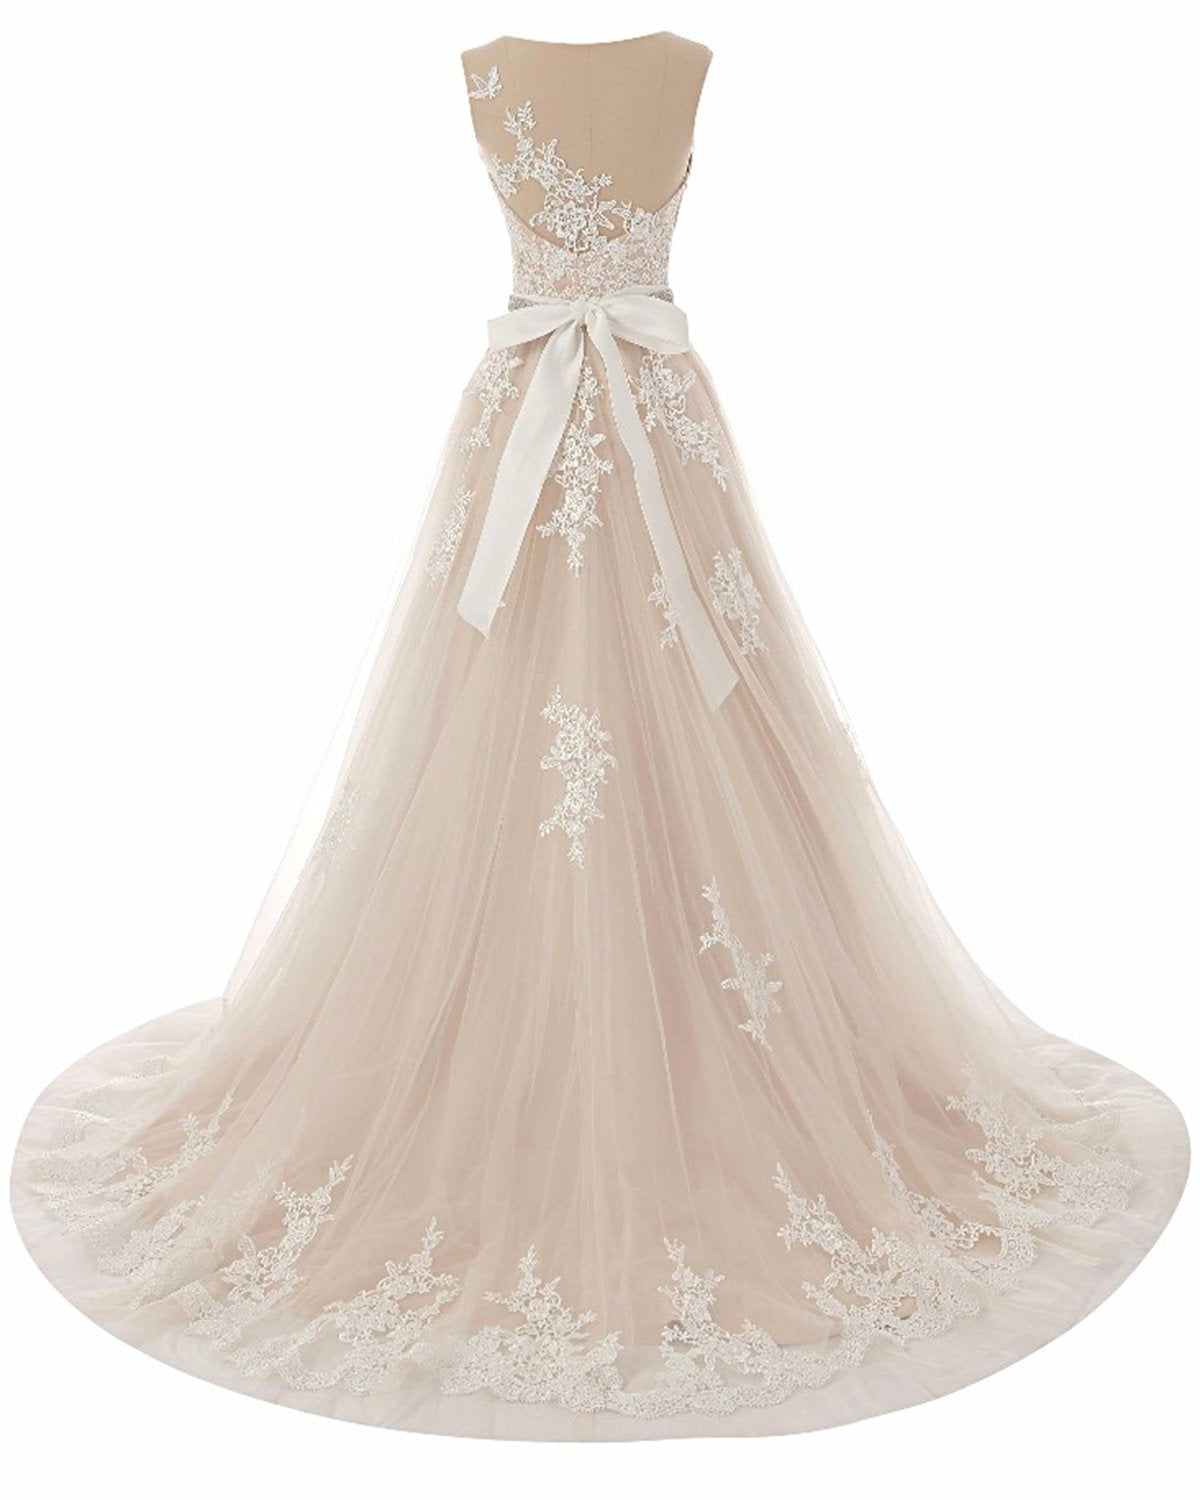 Glamorous Creamy Tulle Round Neck Long Wedding Dress White Lace Applique Bridal Gowns On Sale